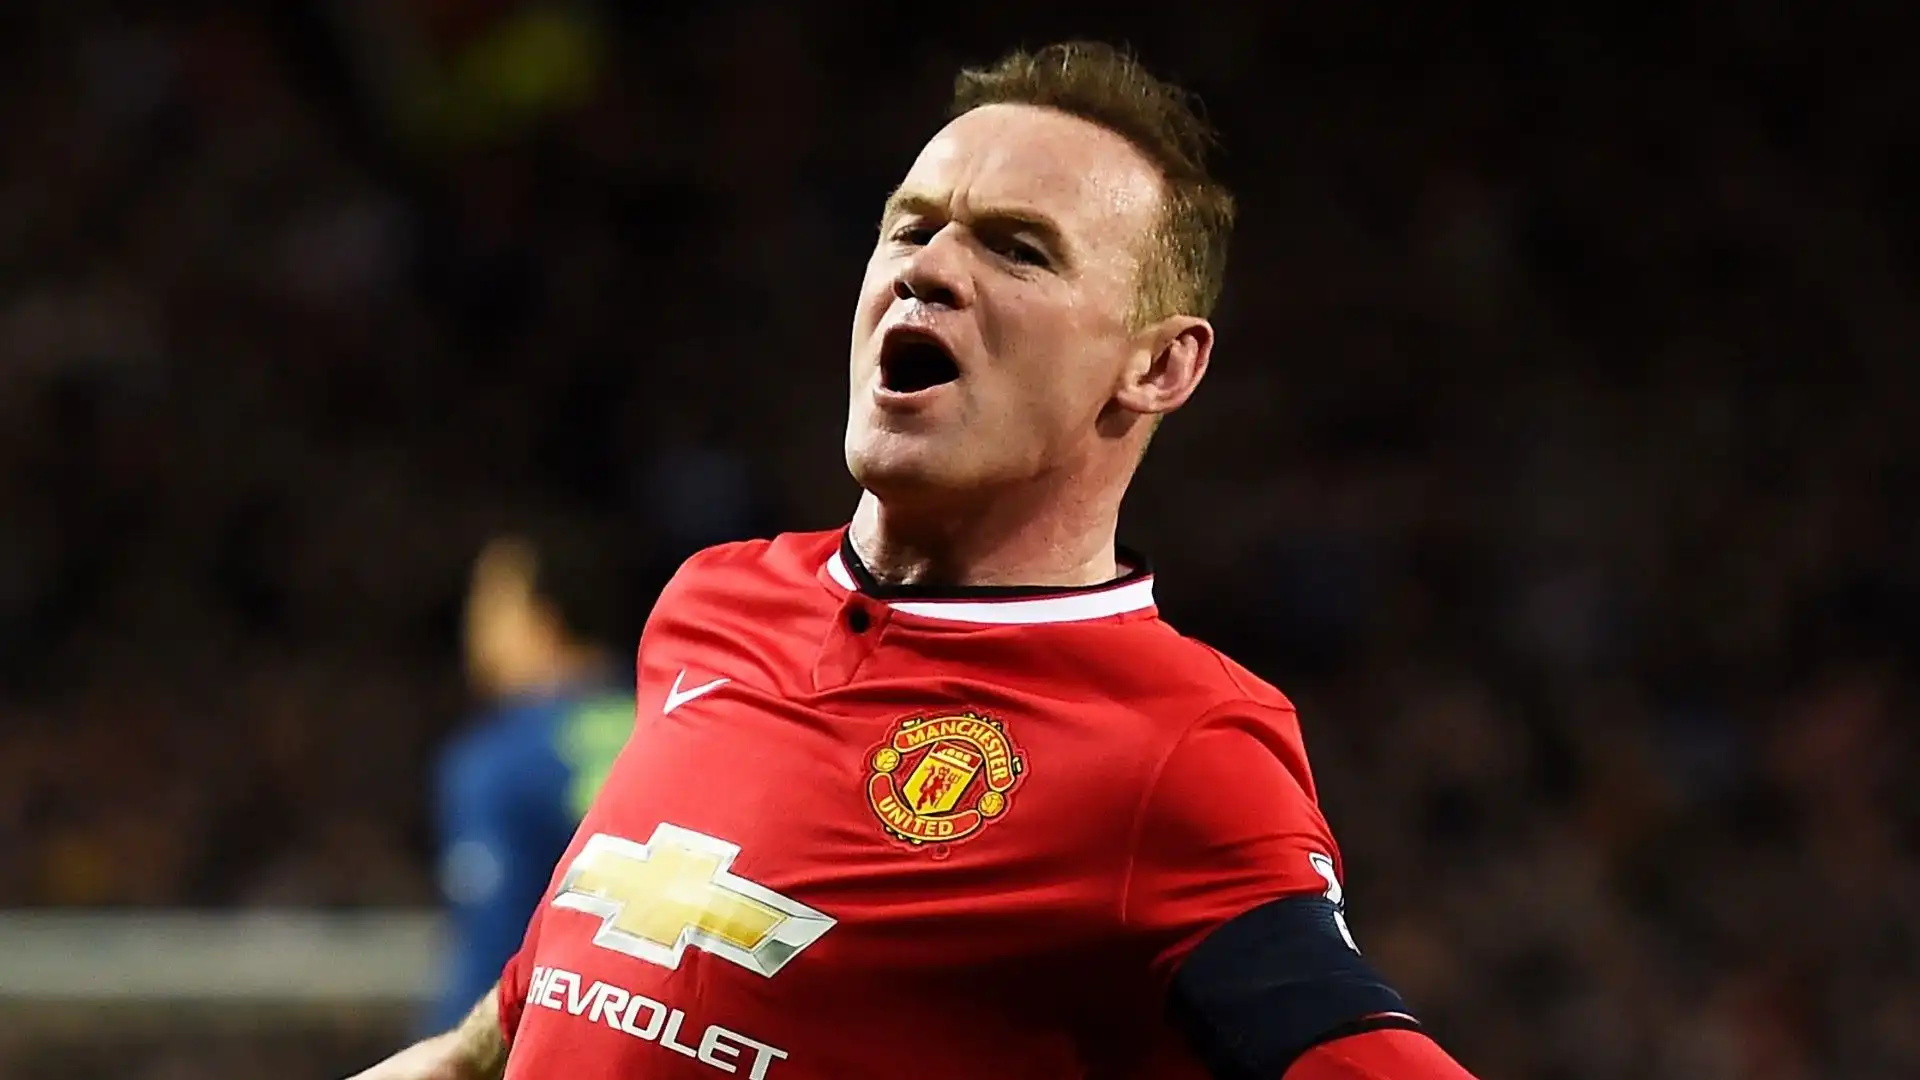 9- Wayne Rooney (Everton, Manchester United, D.C. United, Derby County)